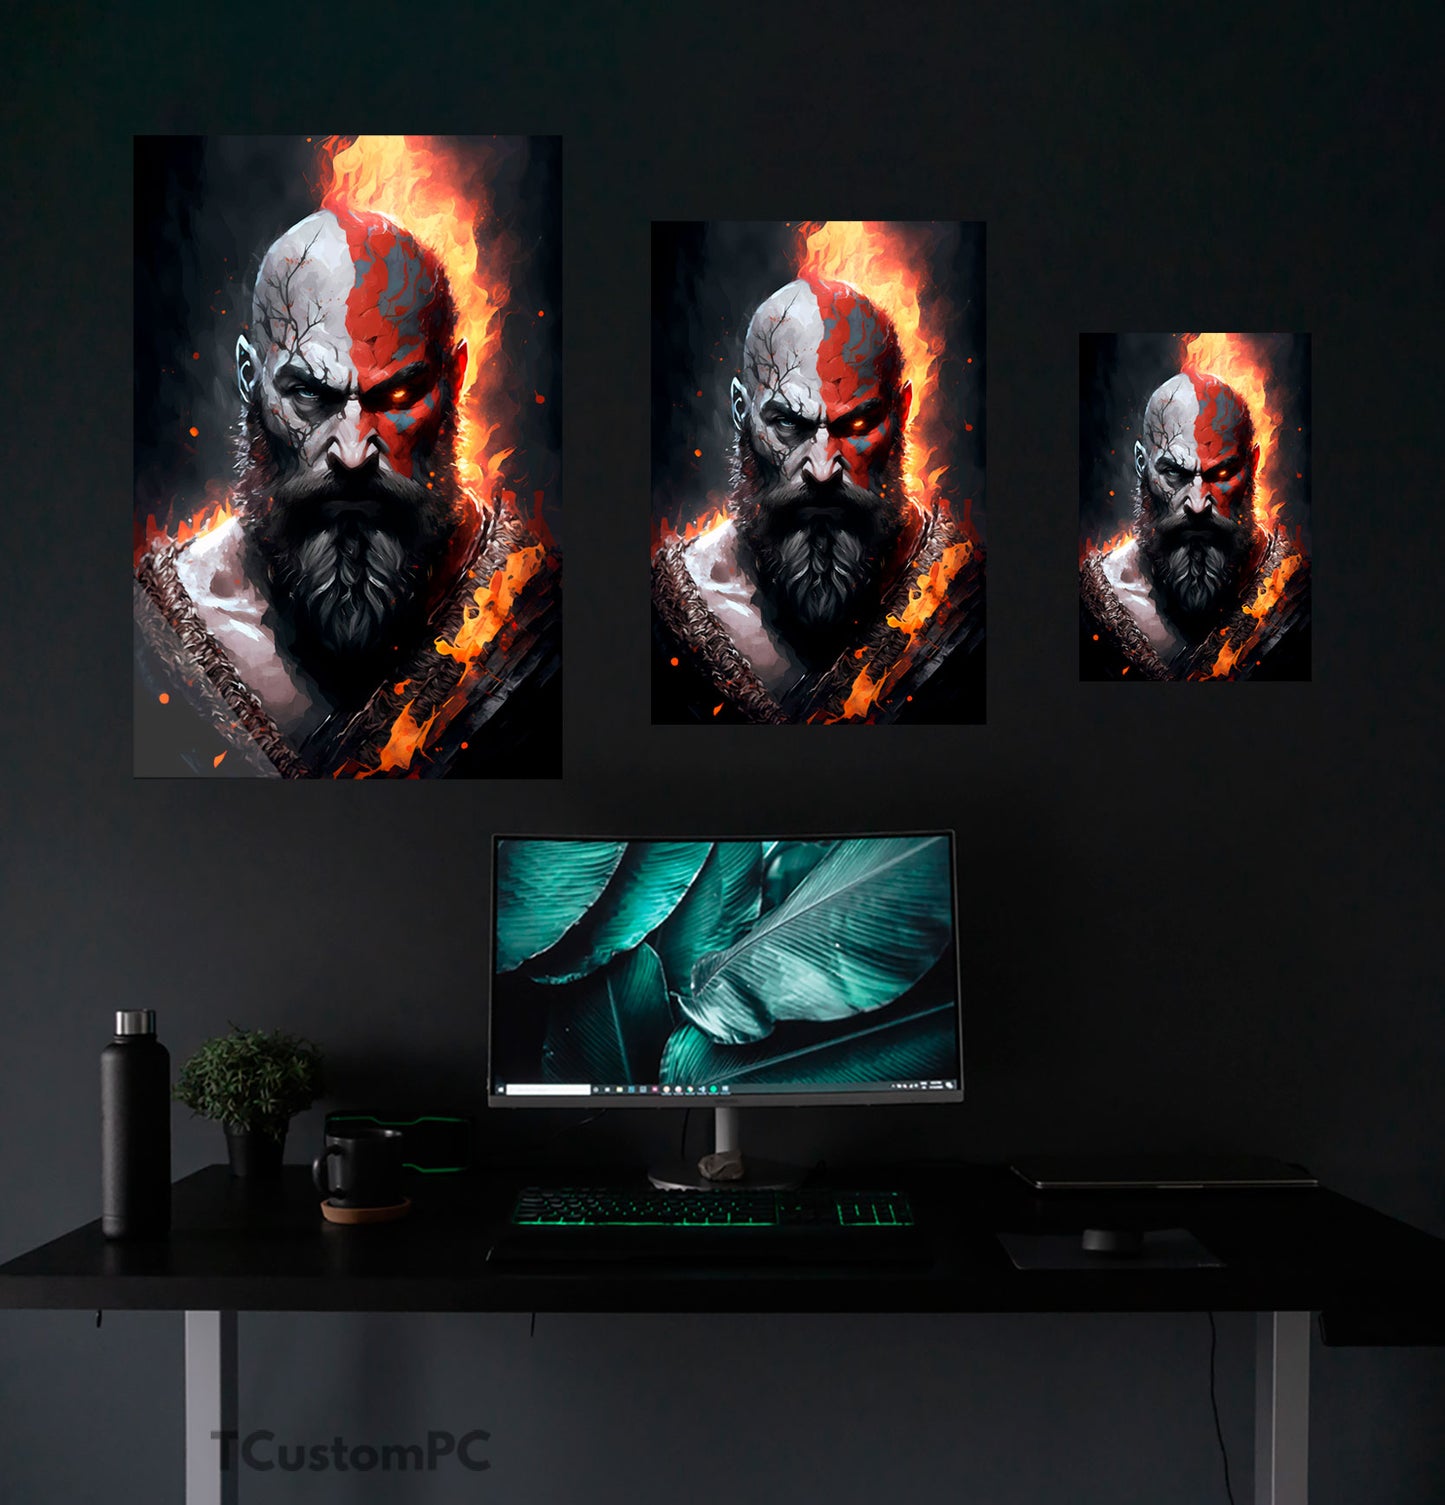 God of War painting